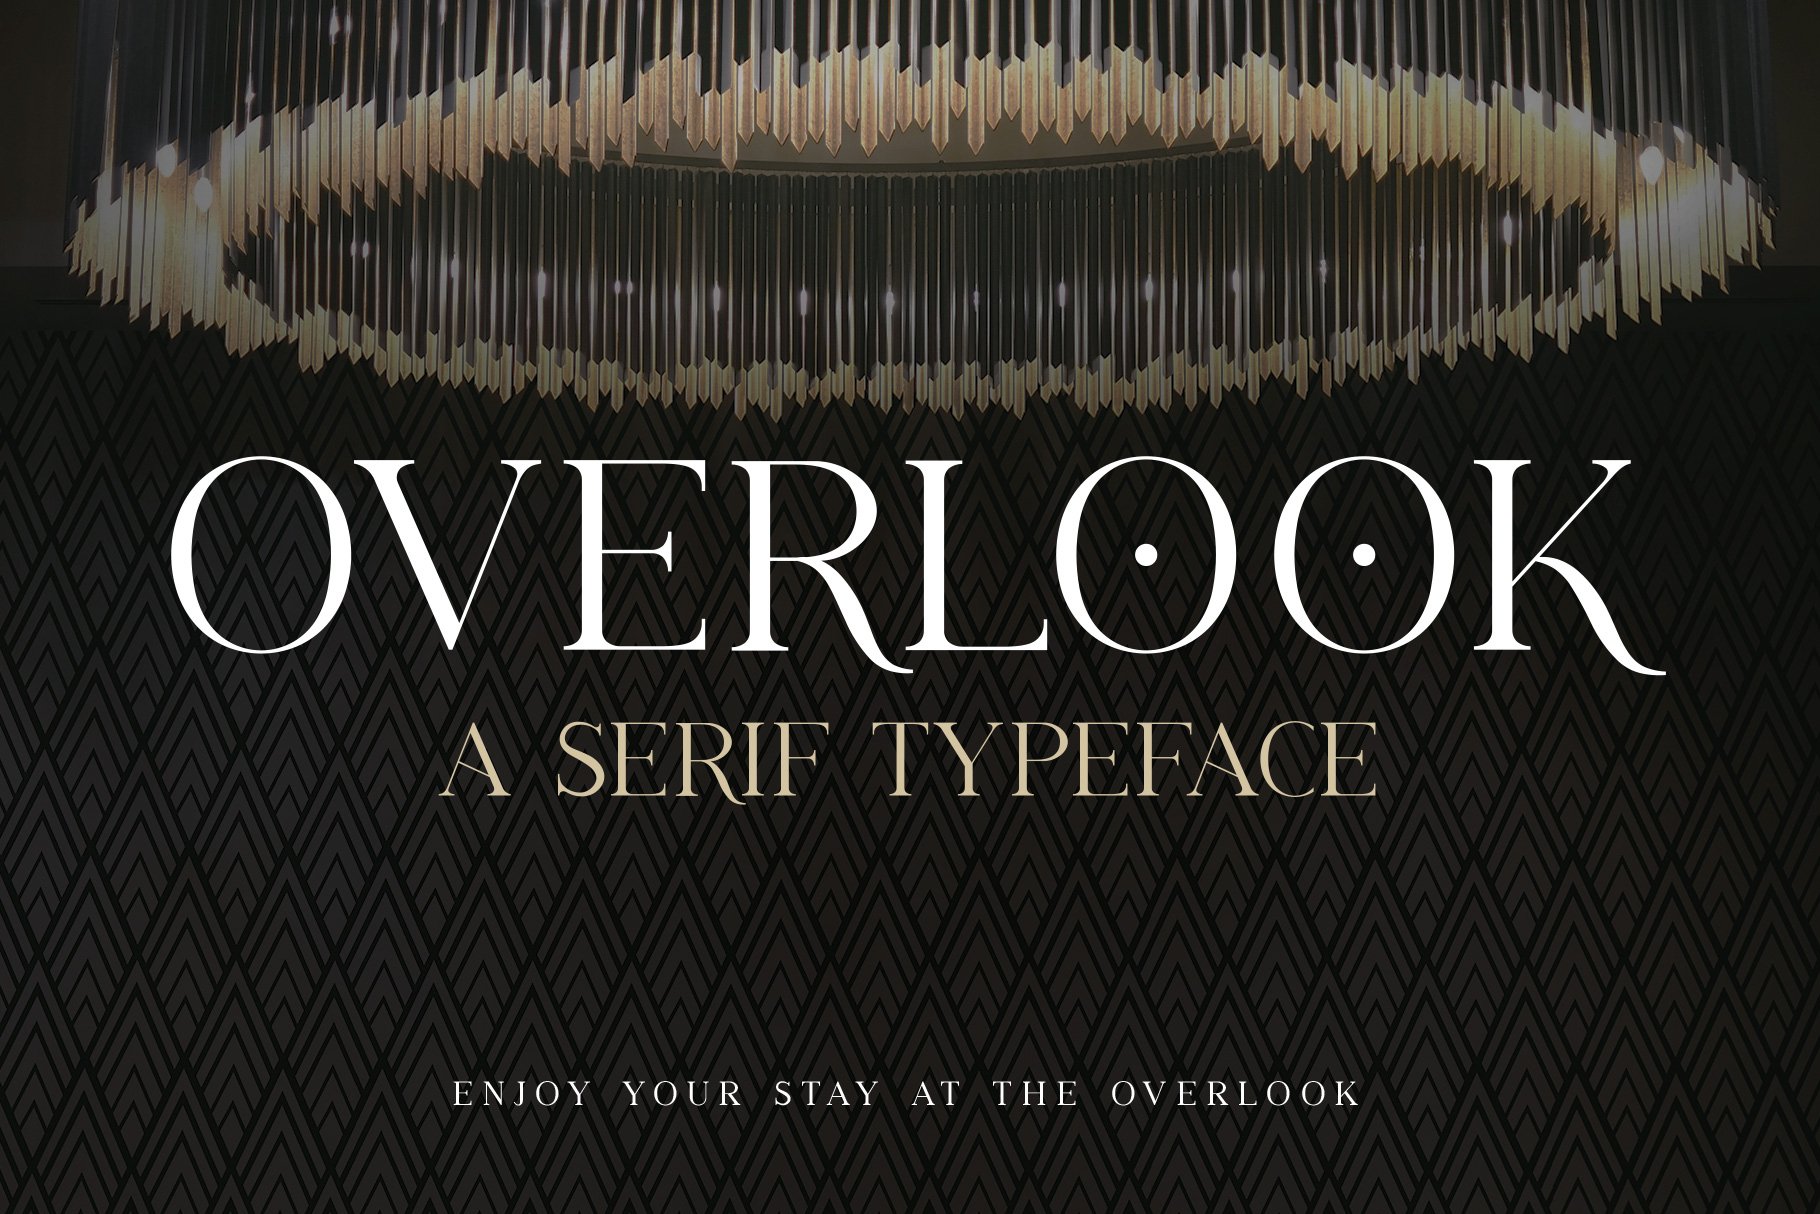 Overlook - A Serif Typeface cover image.